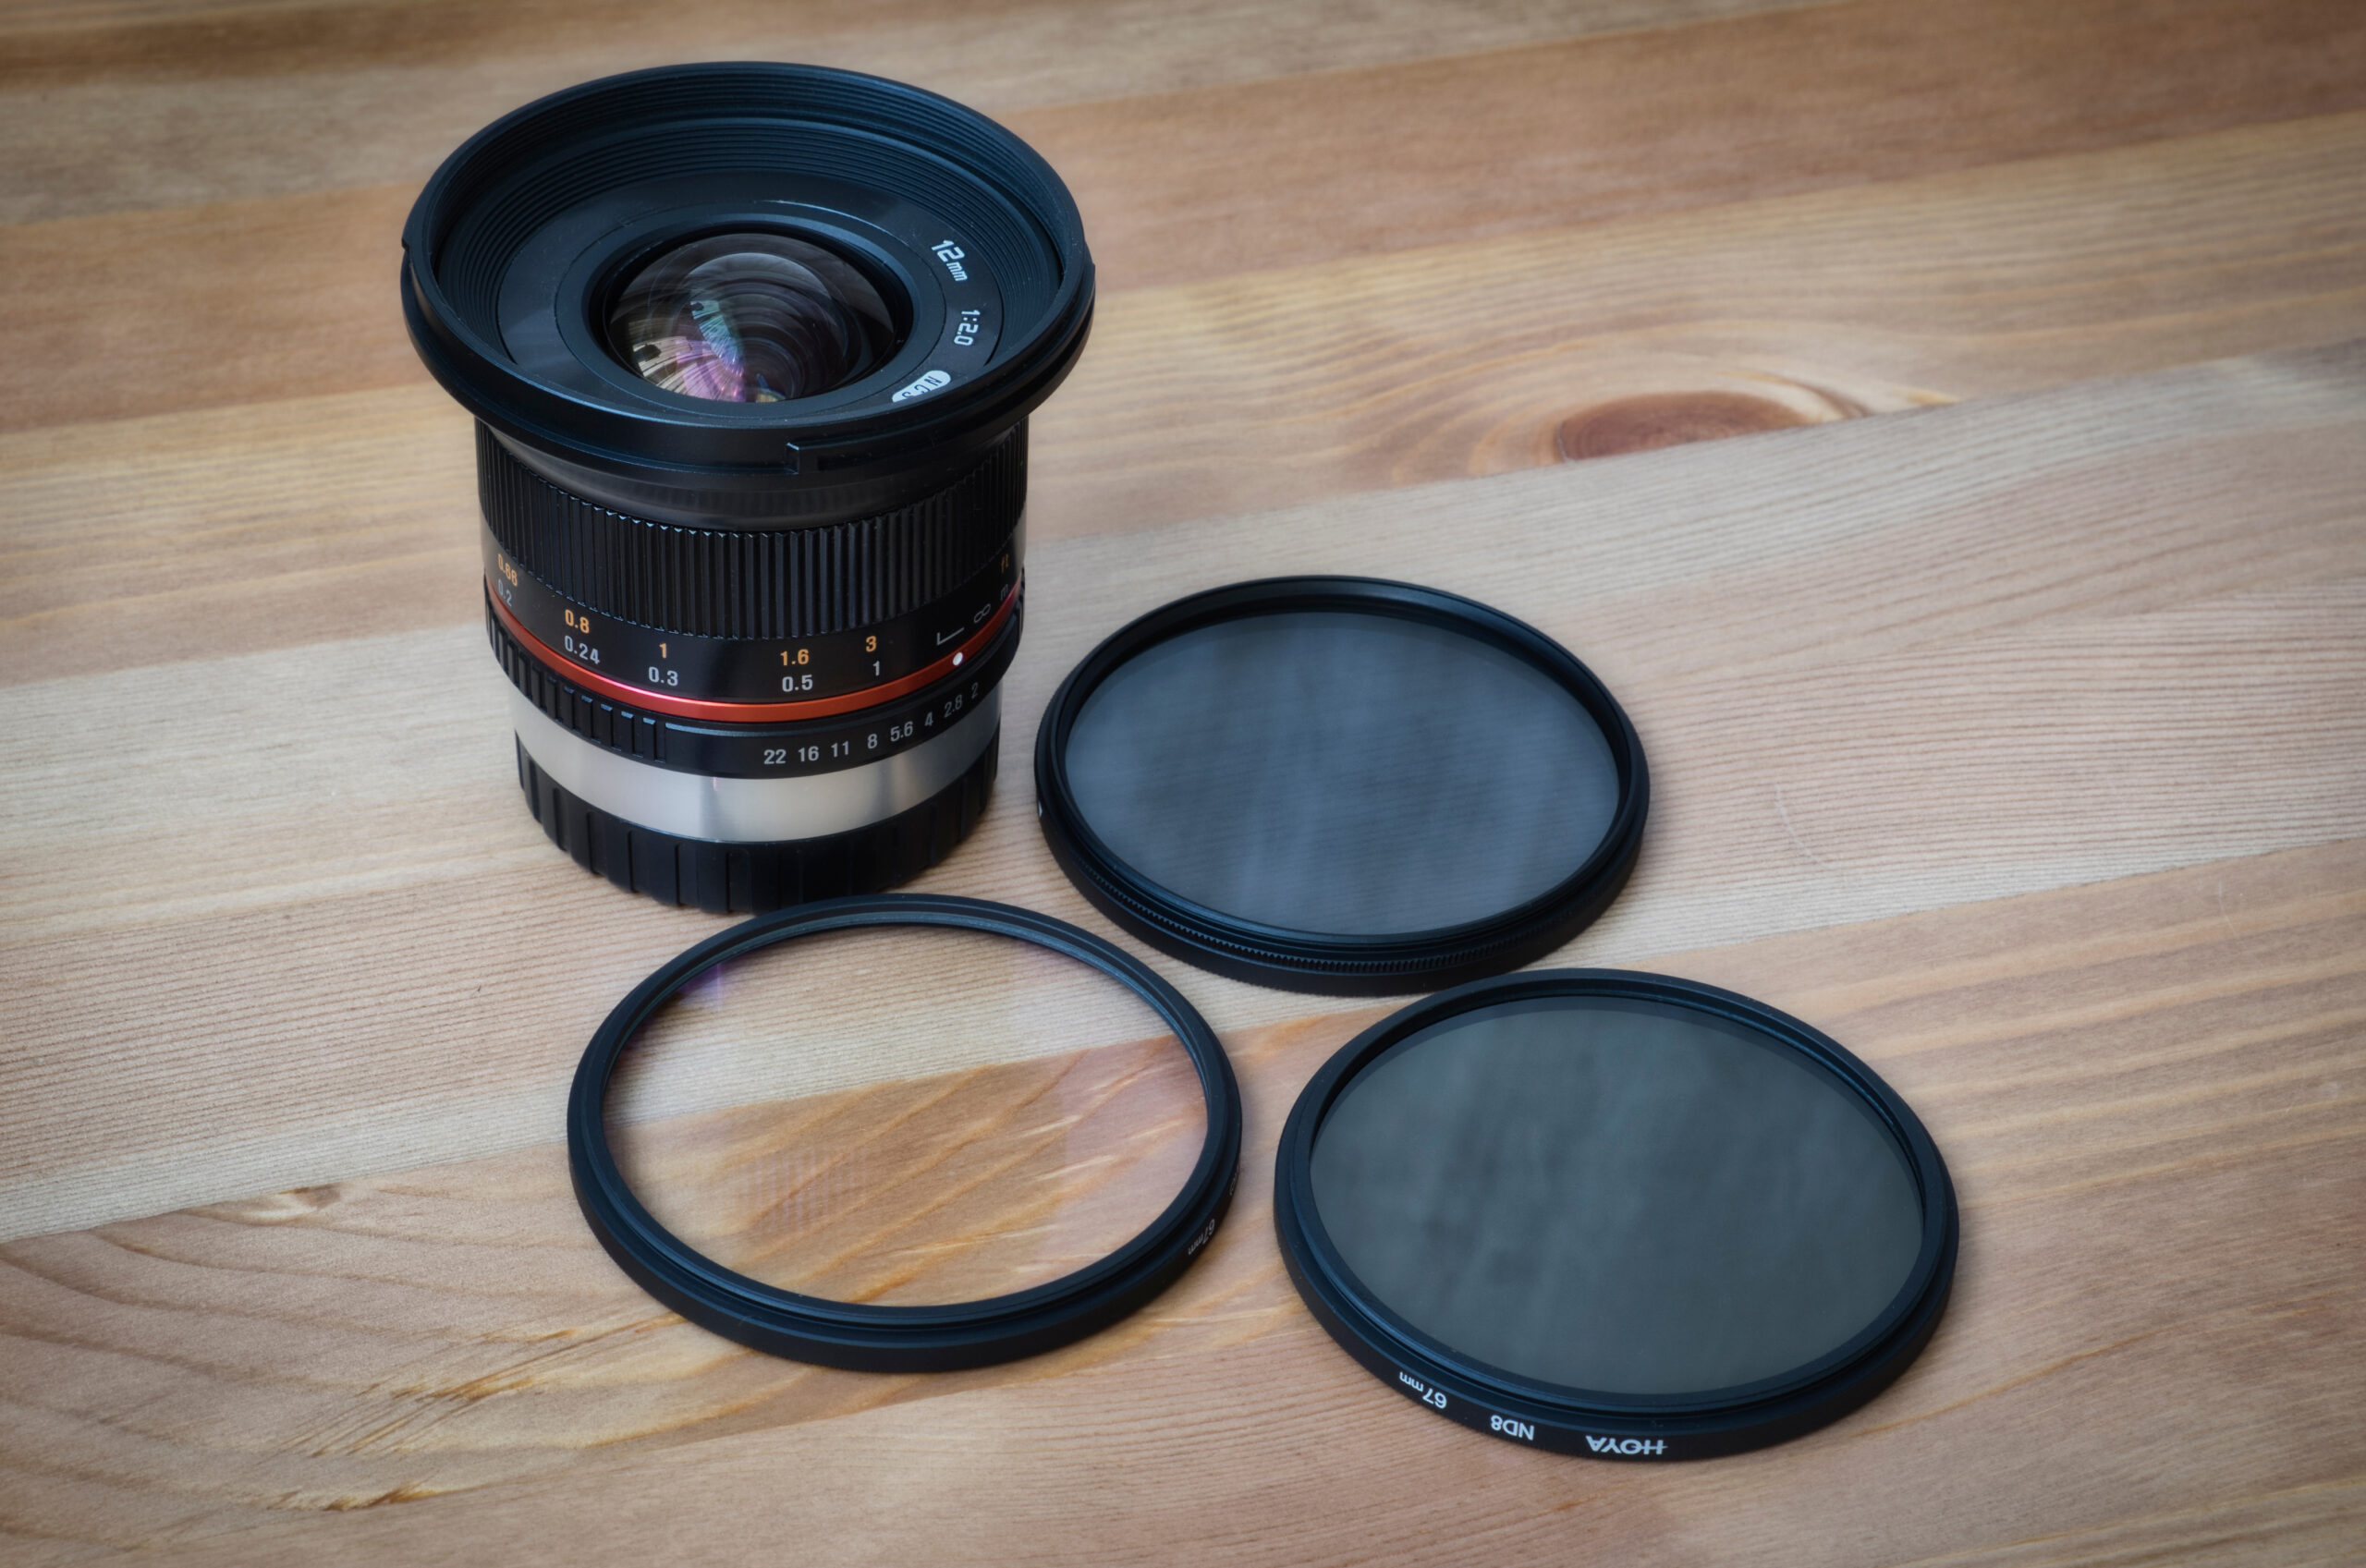 Moscow / Russia - may 27th 2020: Samyang 12mm f2 manual lens for fujifilm x-mount APSC cameras and Hoya filter kit laying on wood surface